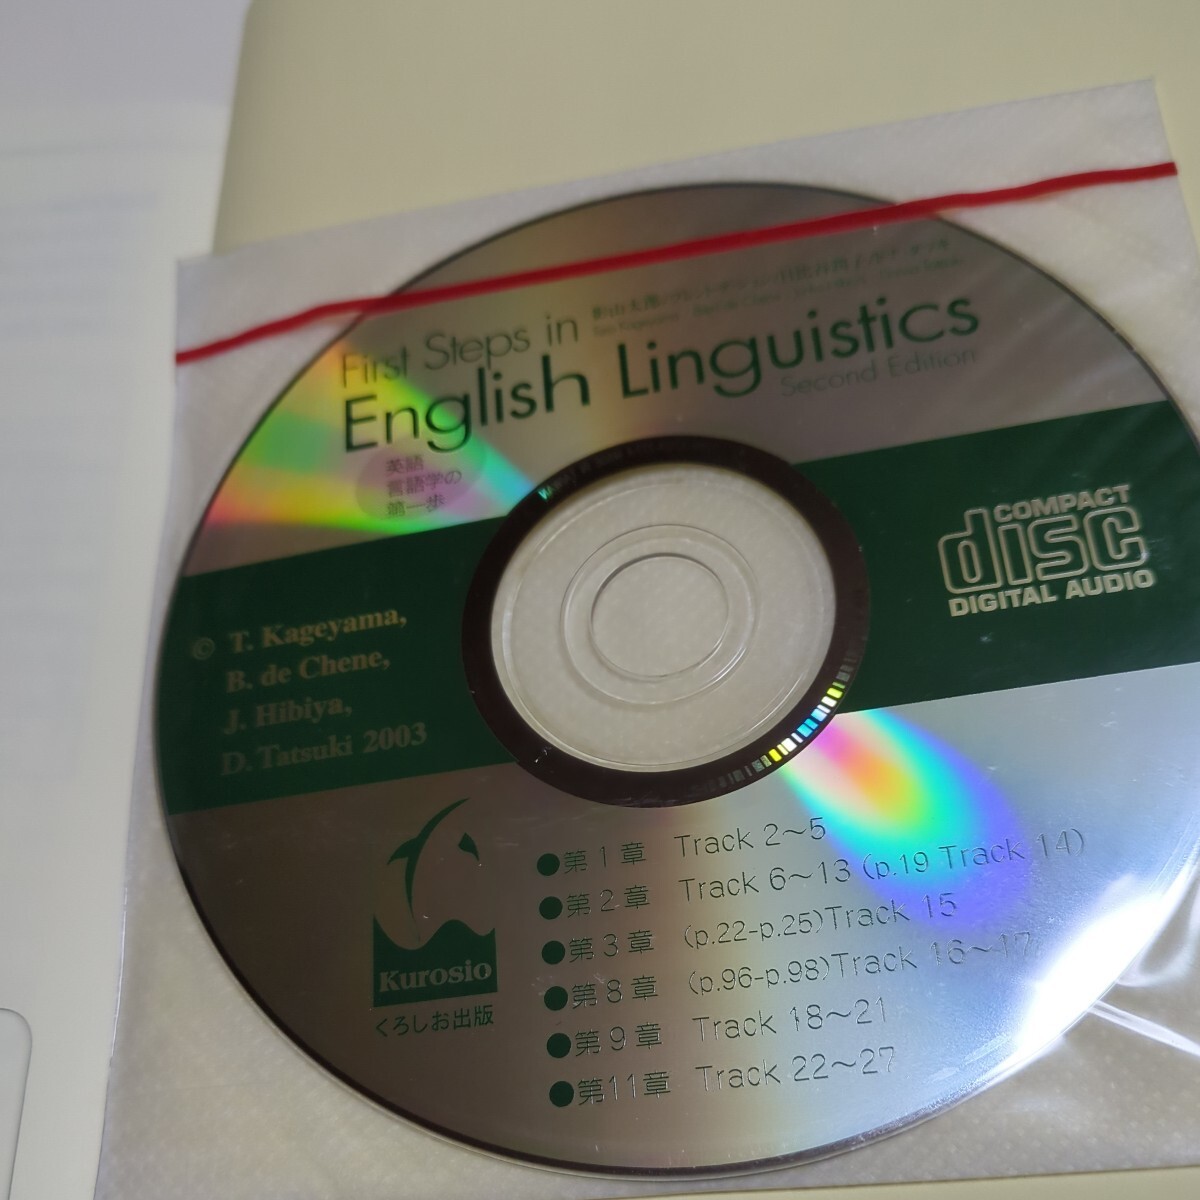 First Steps in English Linguistics 英語言語学の第一歩 2nd Edition CD付 影山太郎 ブレント・デ・シェン 日比谷潤子 ドナ・タツキ_画像2